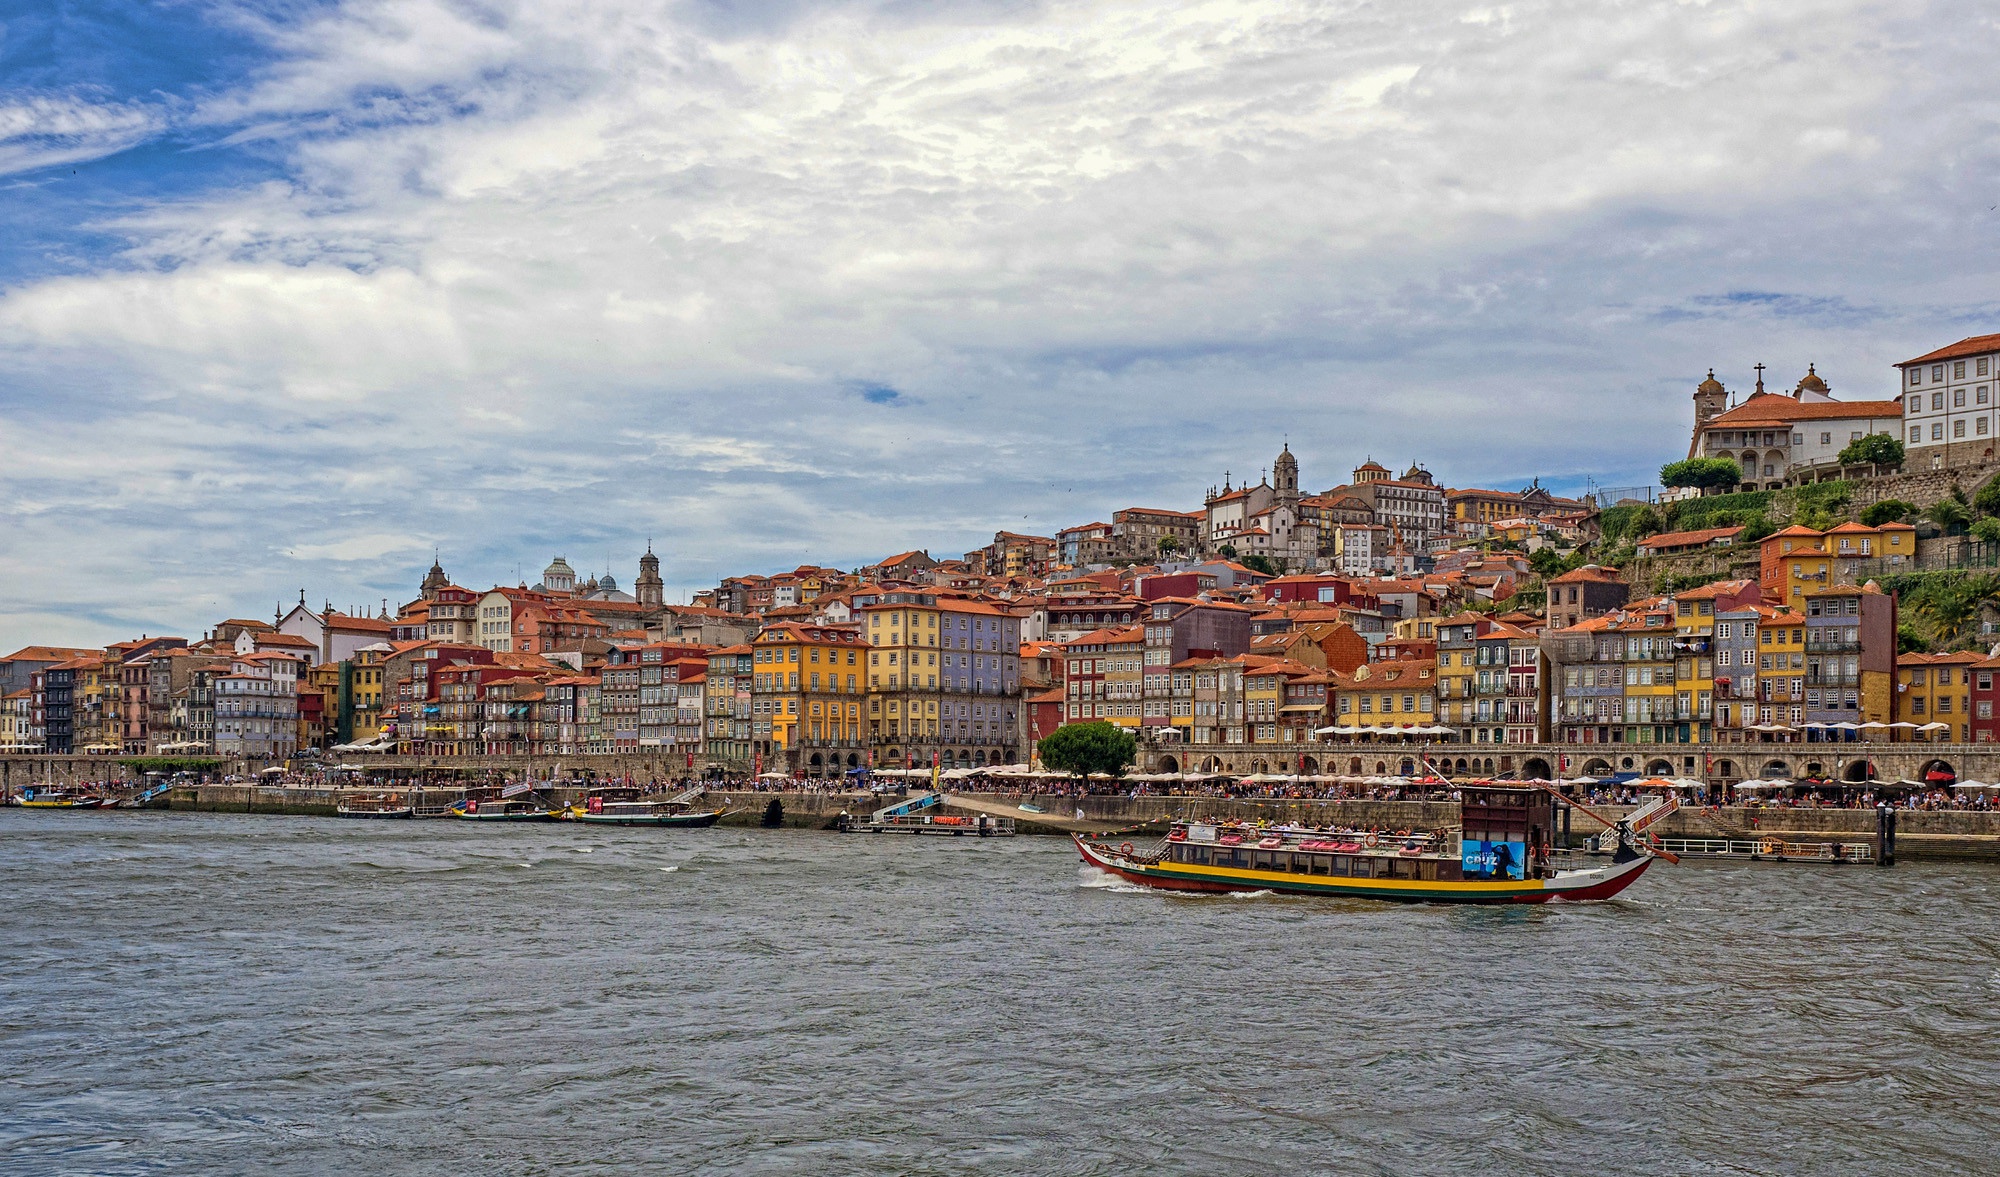 man made, porto, boat, building, house, portugal, river, cities cellphone